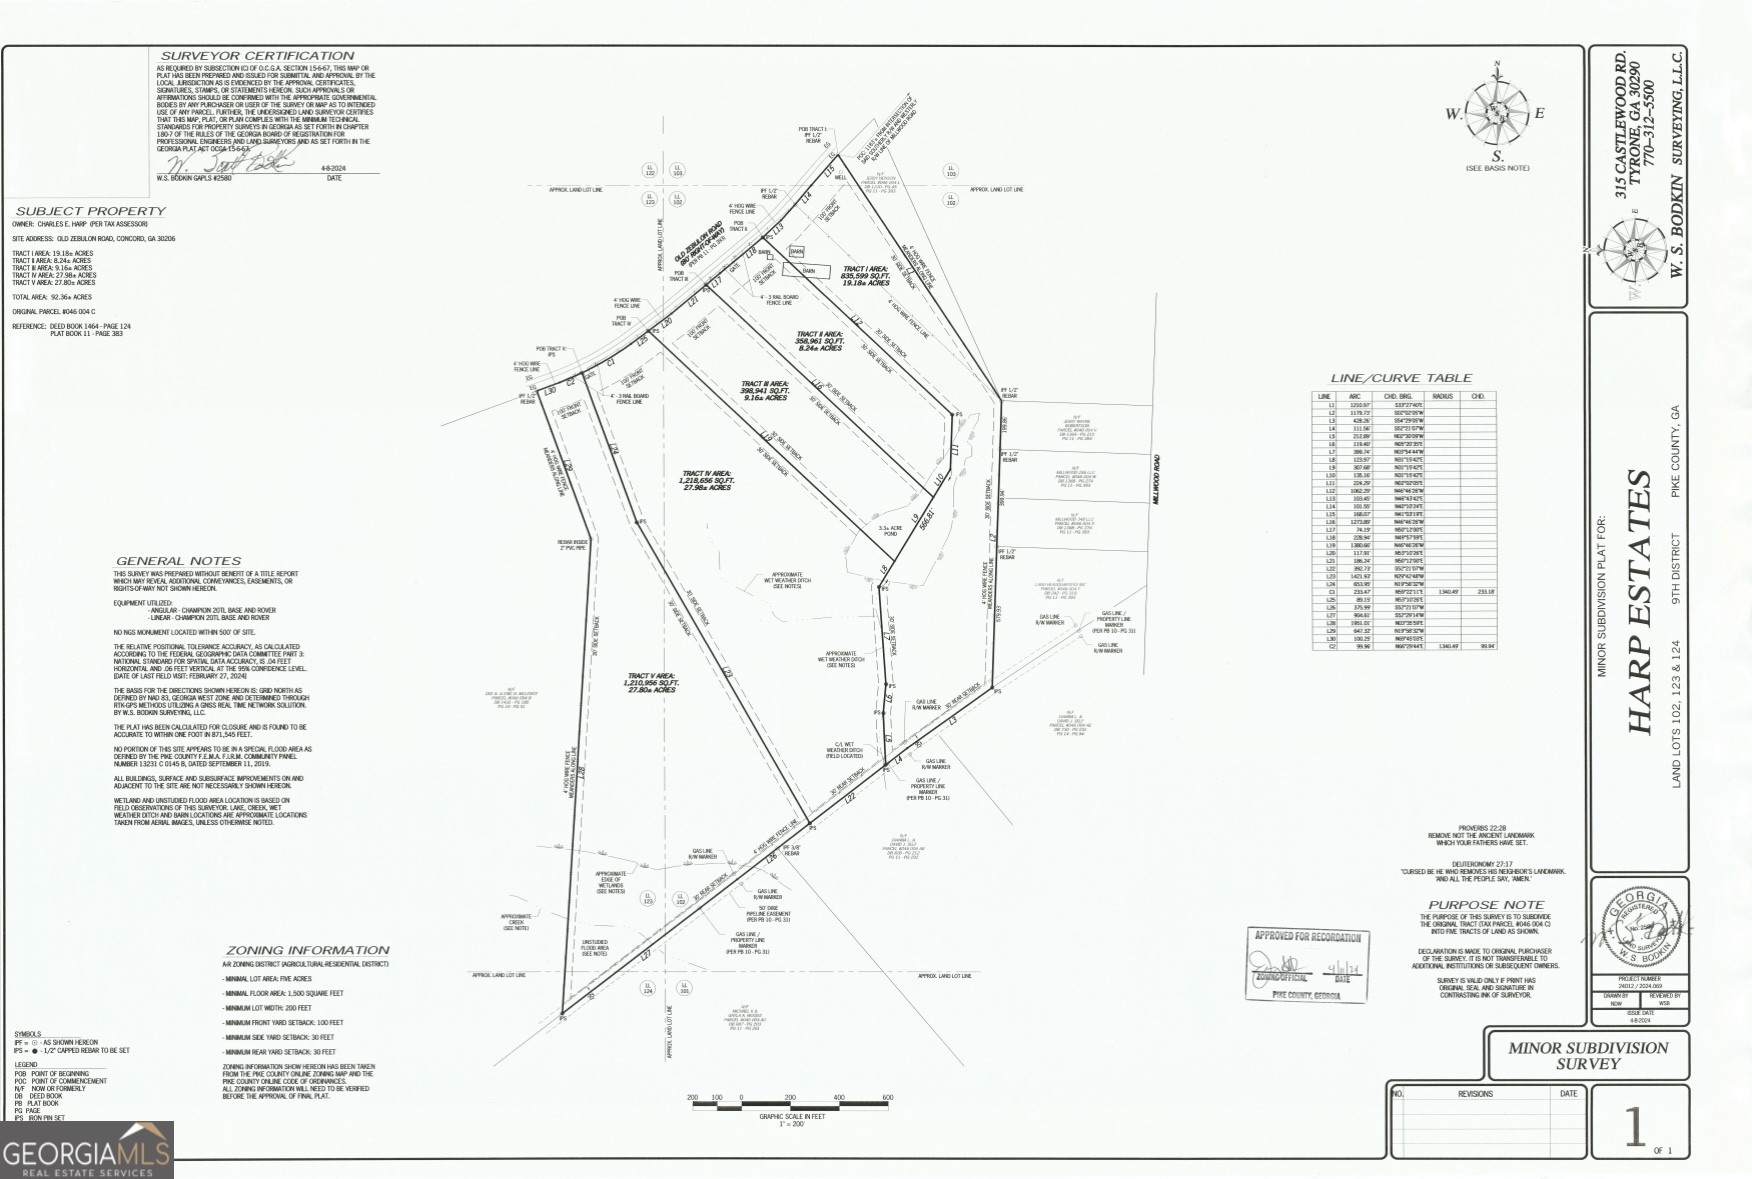 7. 0 Old Zebulon Road - Tract 4